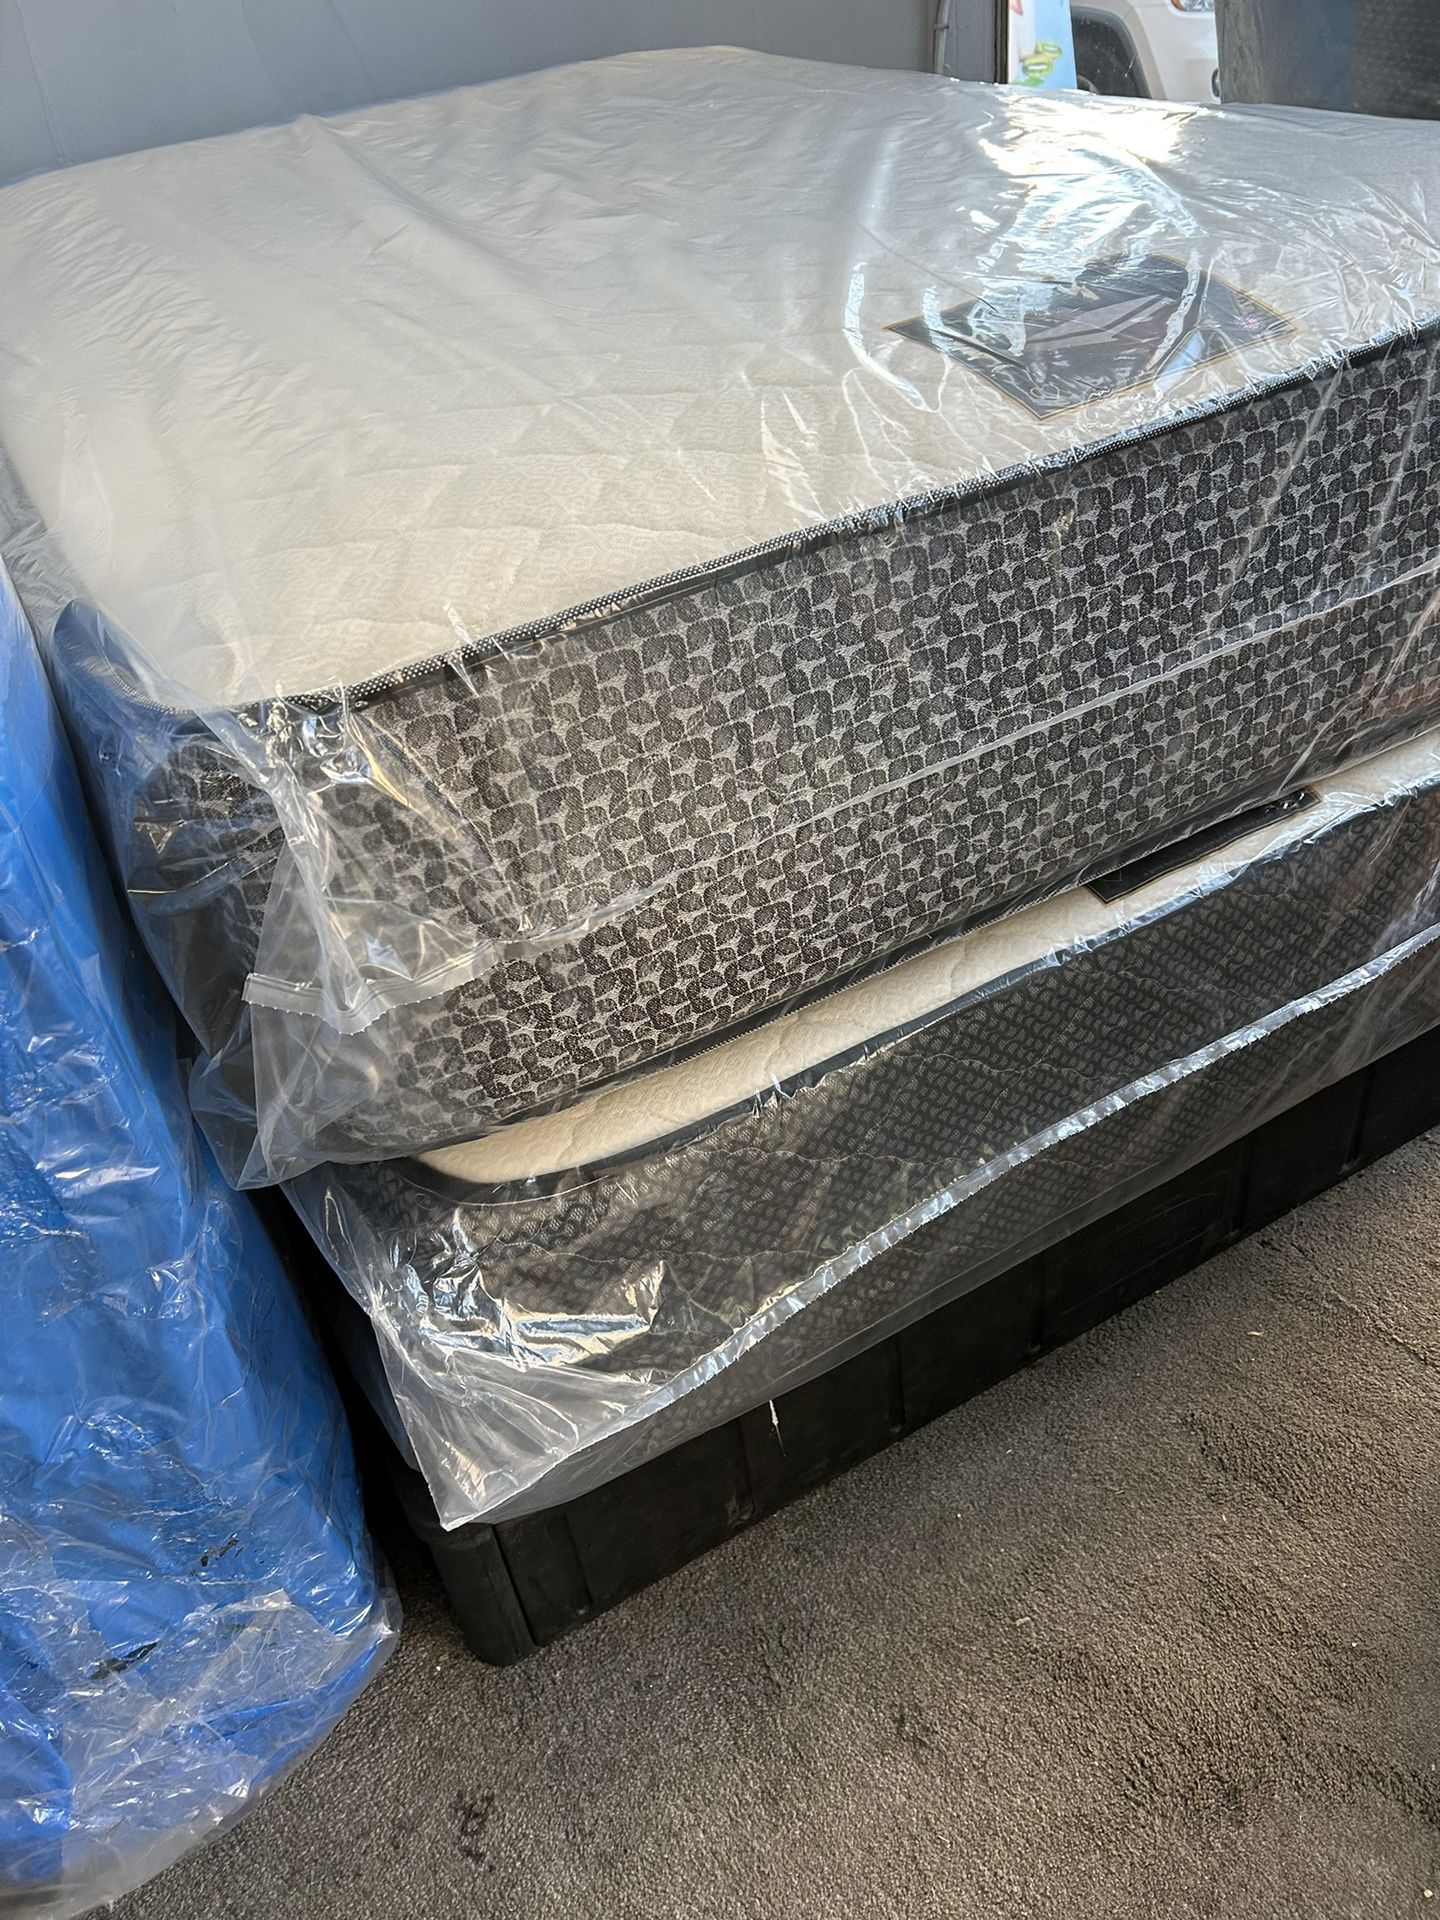 QUEEN SIZE MATTRESS BRAND NEW 🆕 AVAILABLE ALL SIZES LOCATED 303 POCASSET AVE PROVIDENCE RI OPEN 7 DAY 